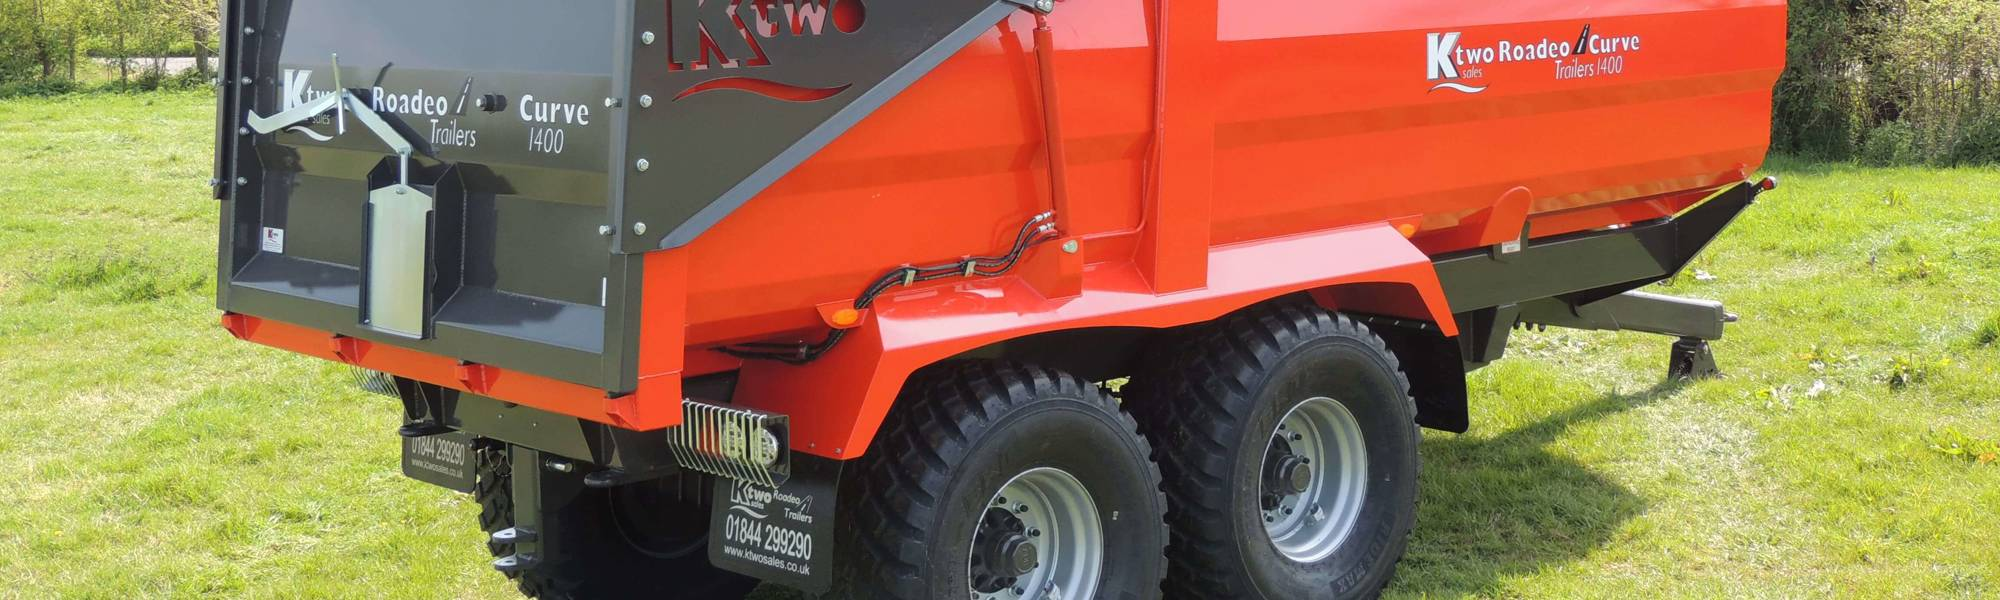 Curve Trailers - ktwo